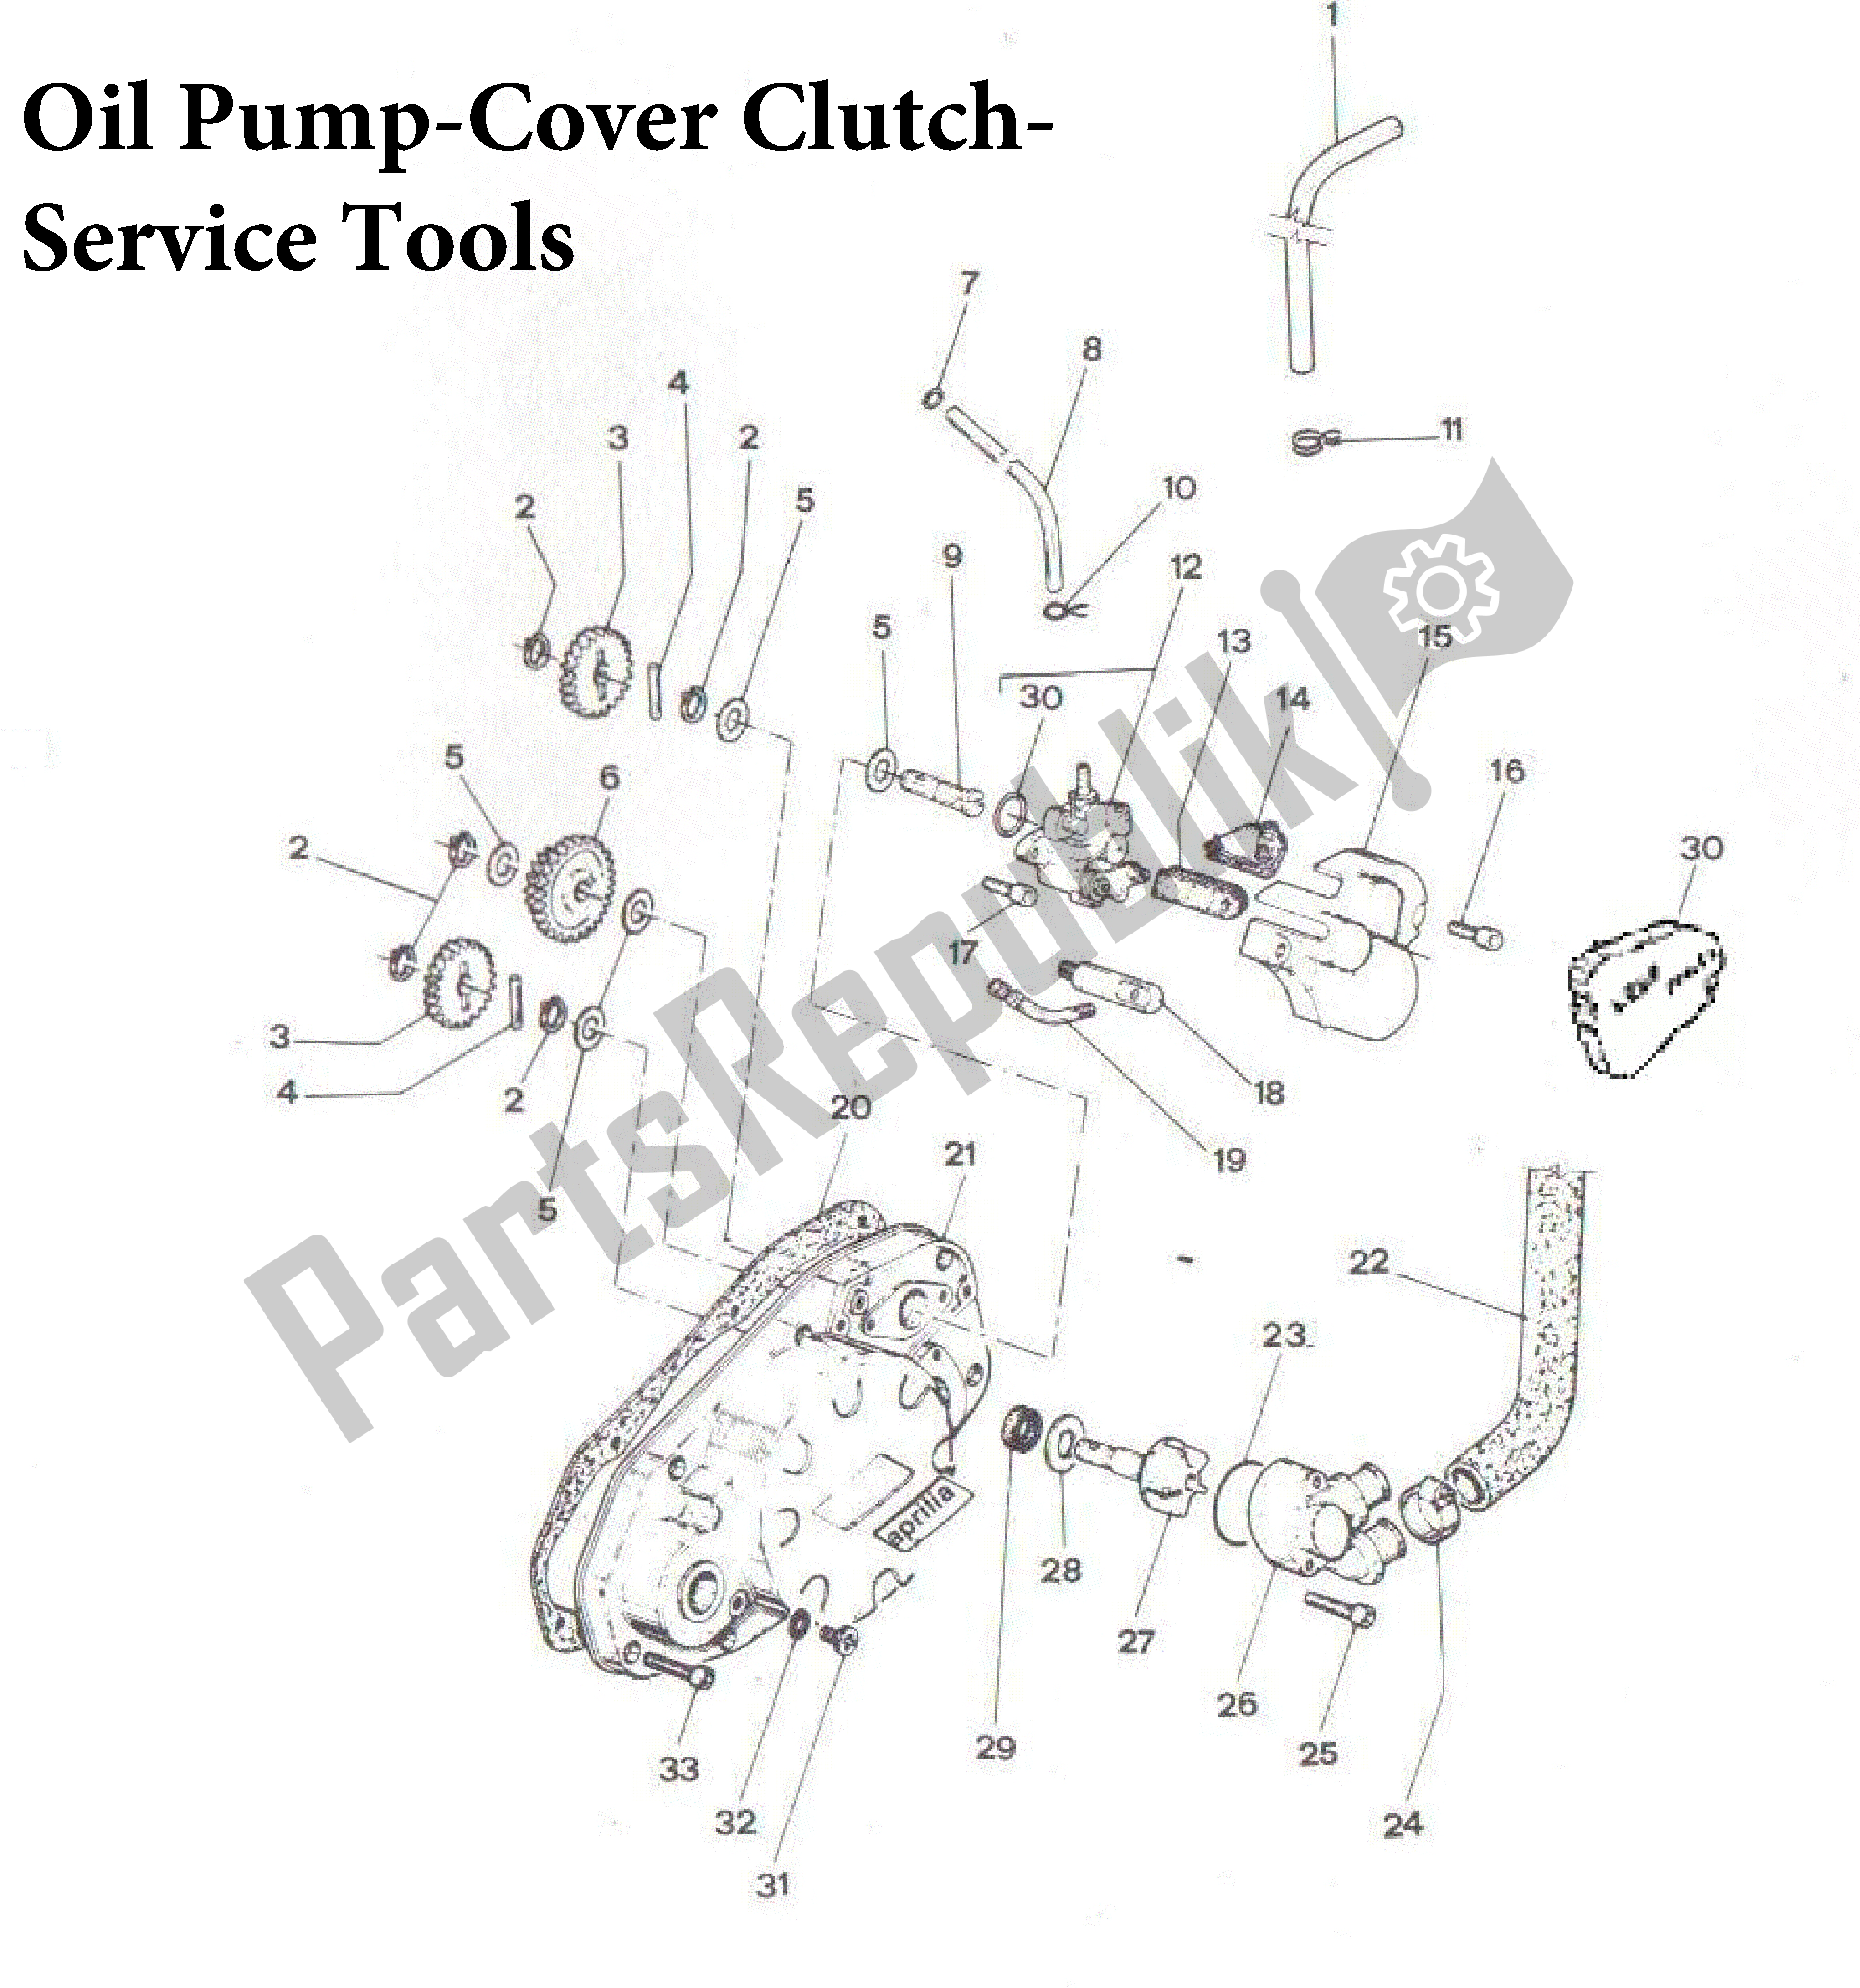 All parts for the Oil Pump-cover Clutch-service Tools of the Aprilia AF1 50 1989